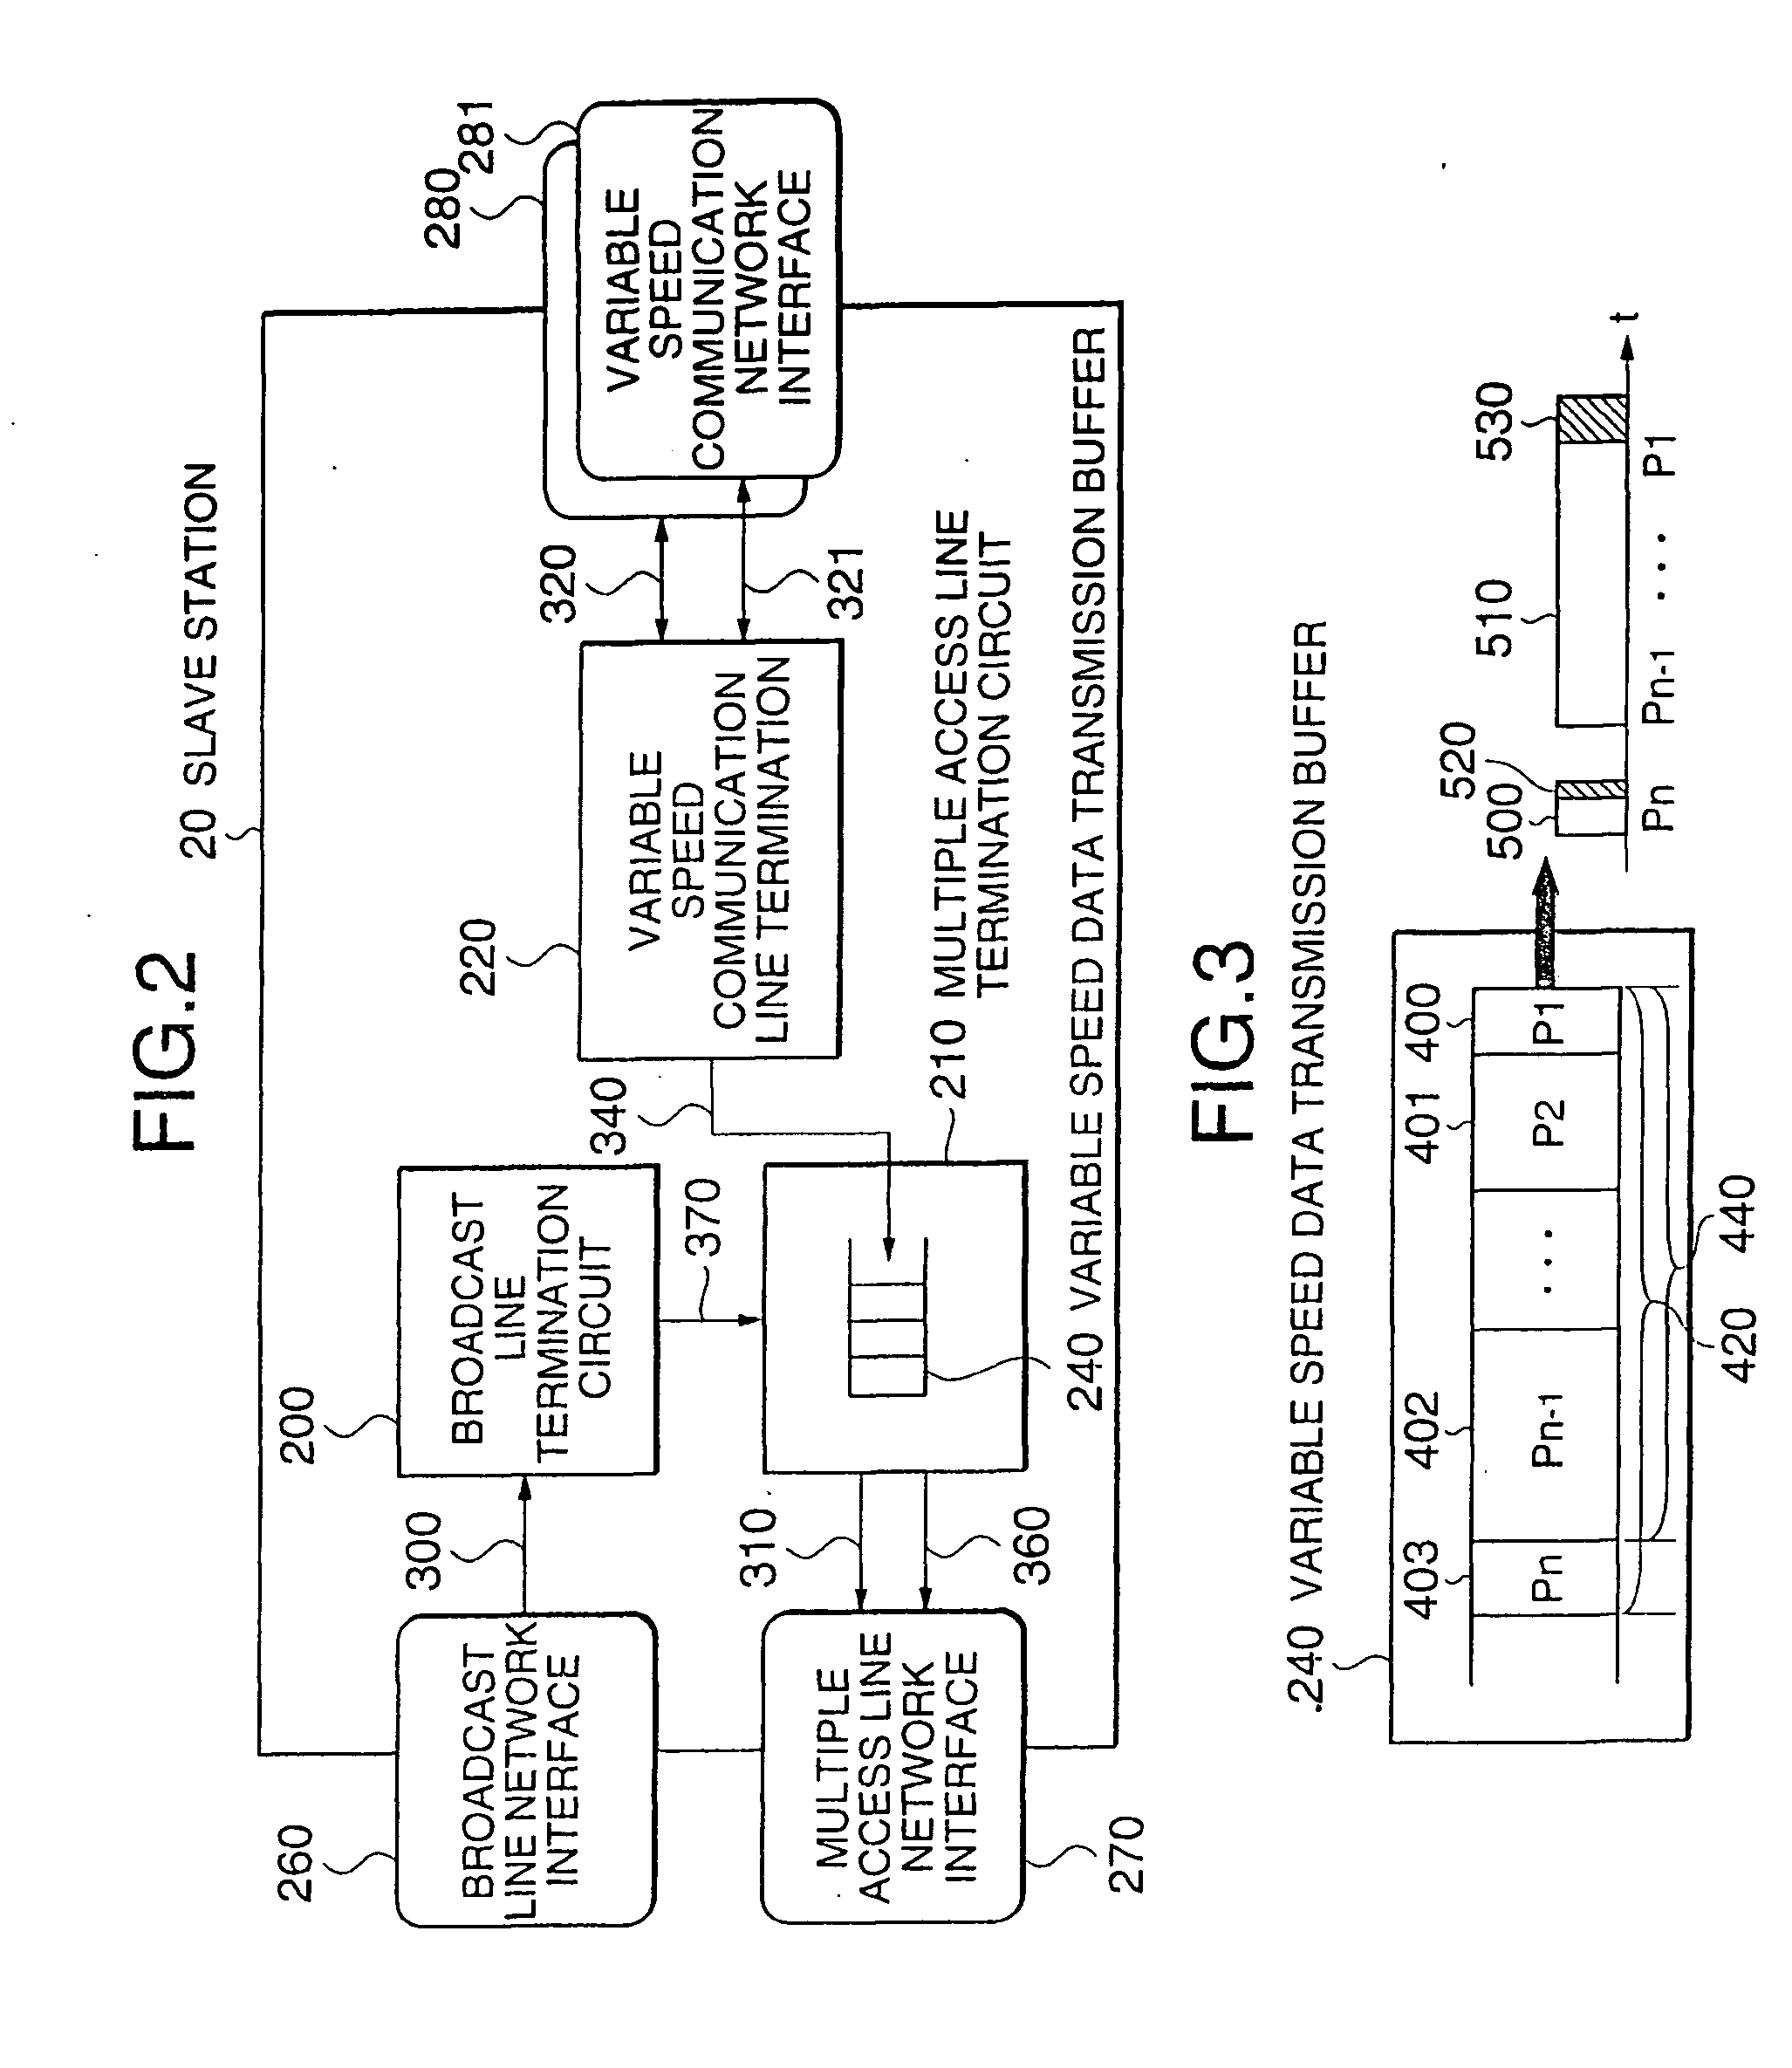 Multiple access communication system and data transceiver